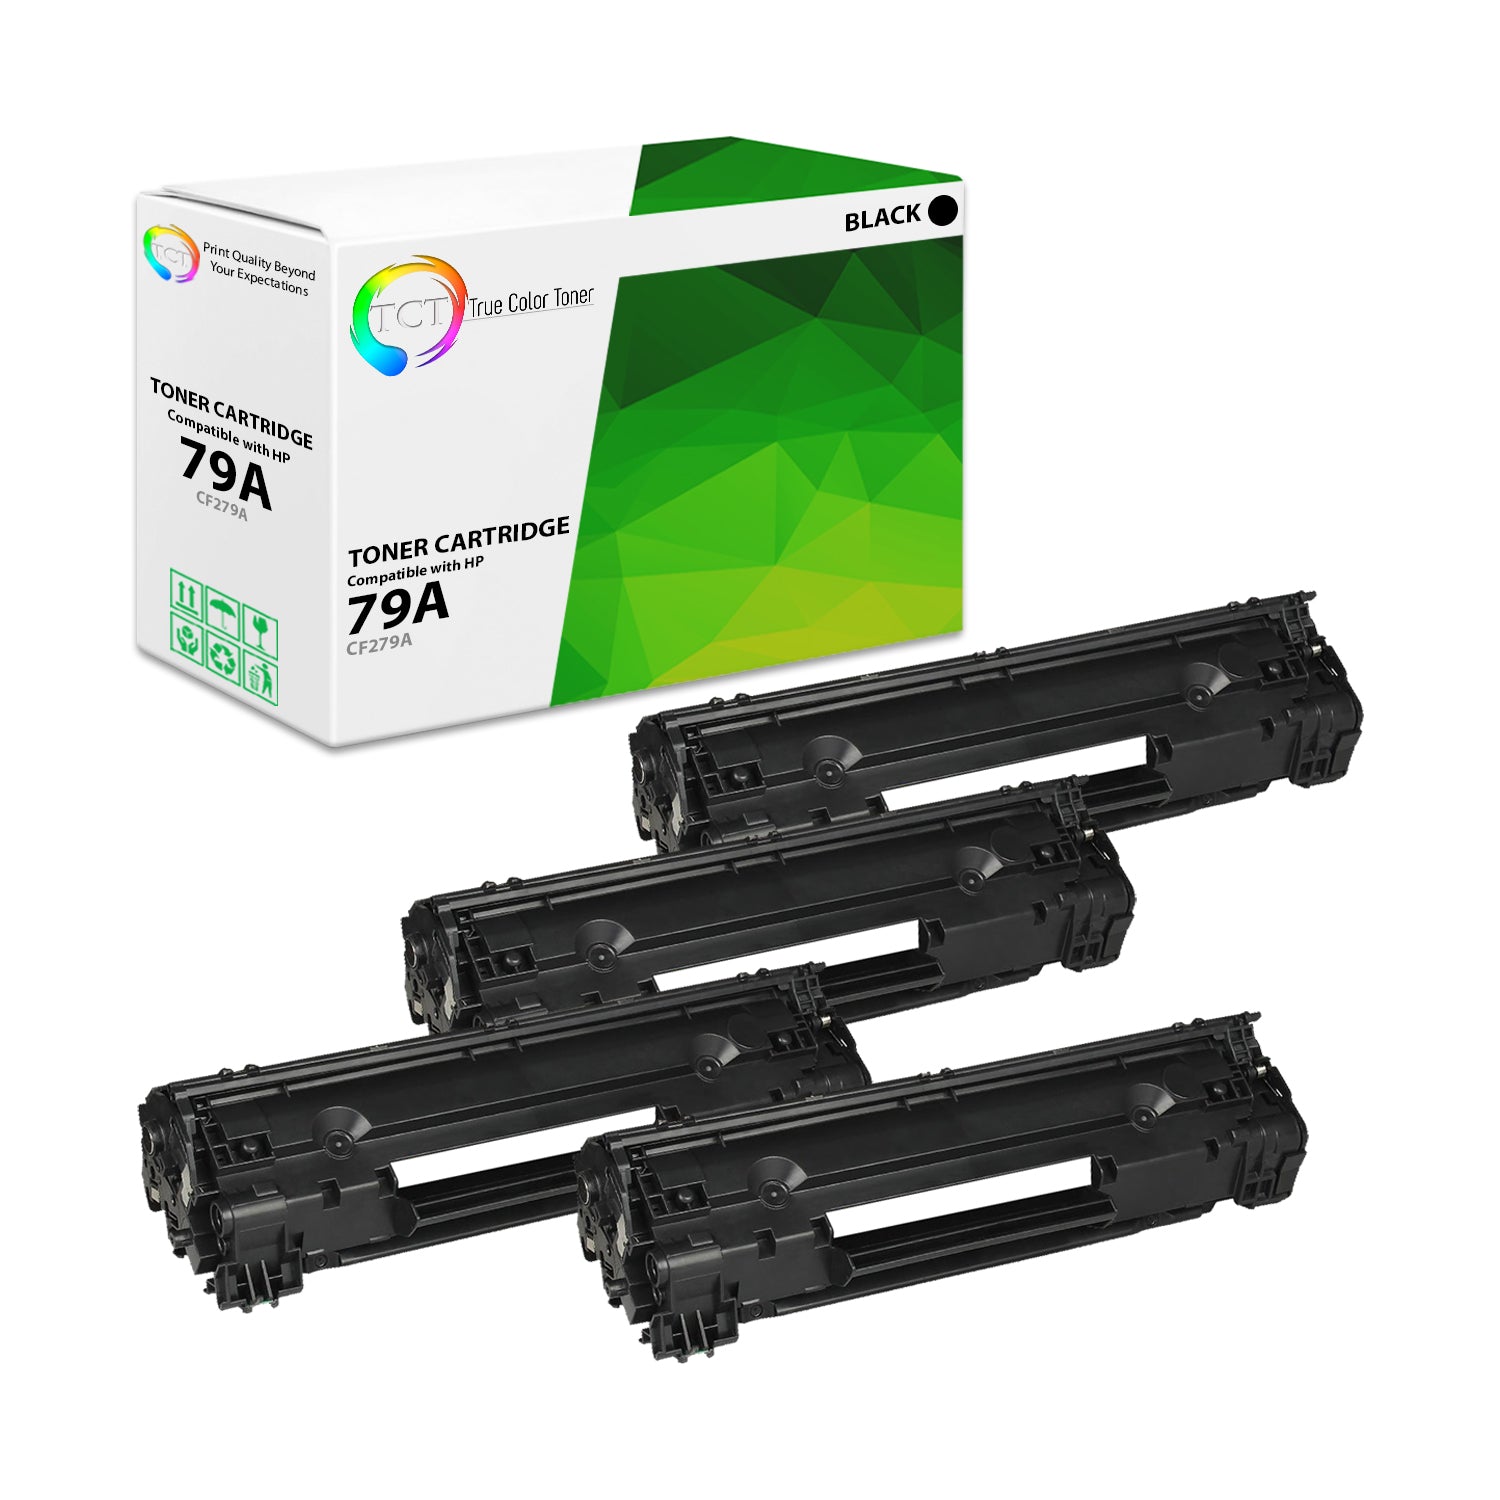 TCT Compatible Toner Cartridge Replacement for the HP 79A Series - 4 Pack Black